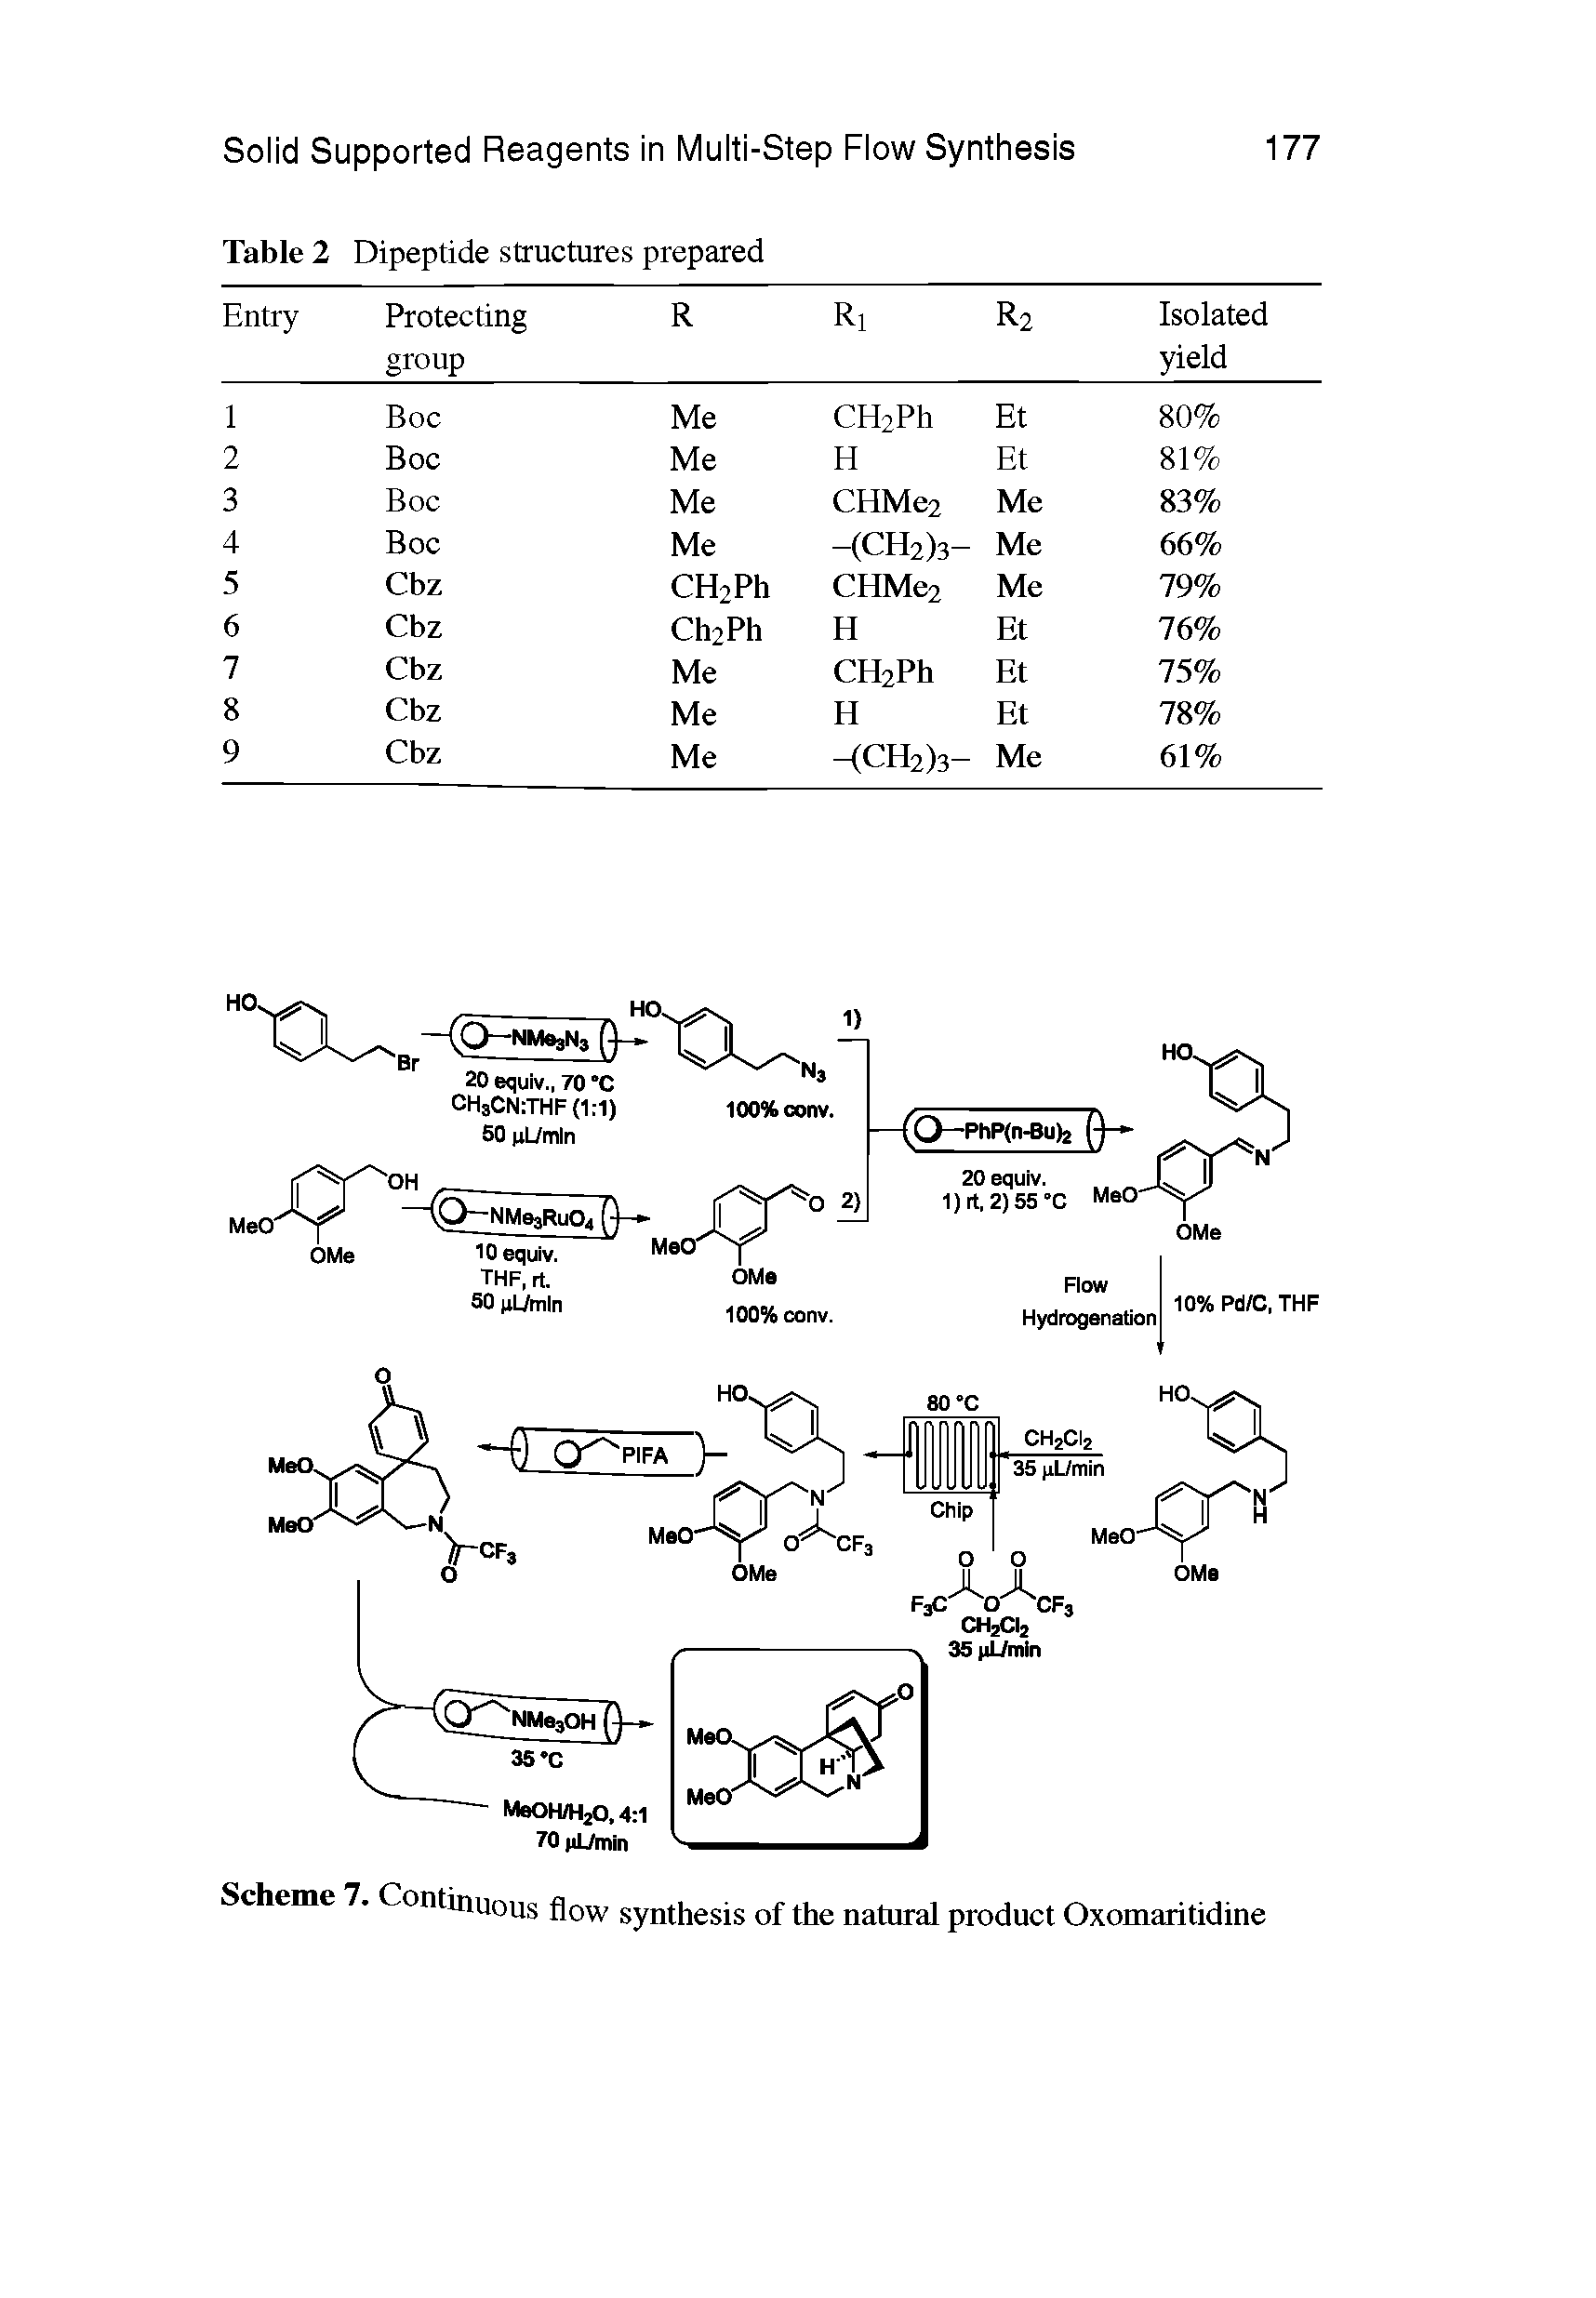 Scheme 7. Continuous flow synthesis of the natural product Oxomaritidine...